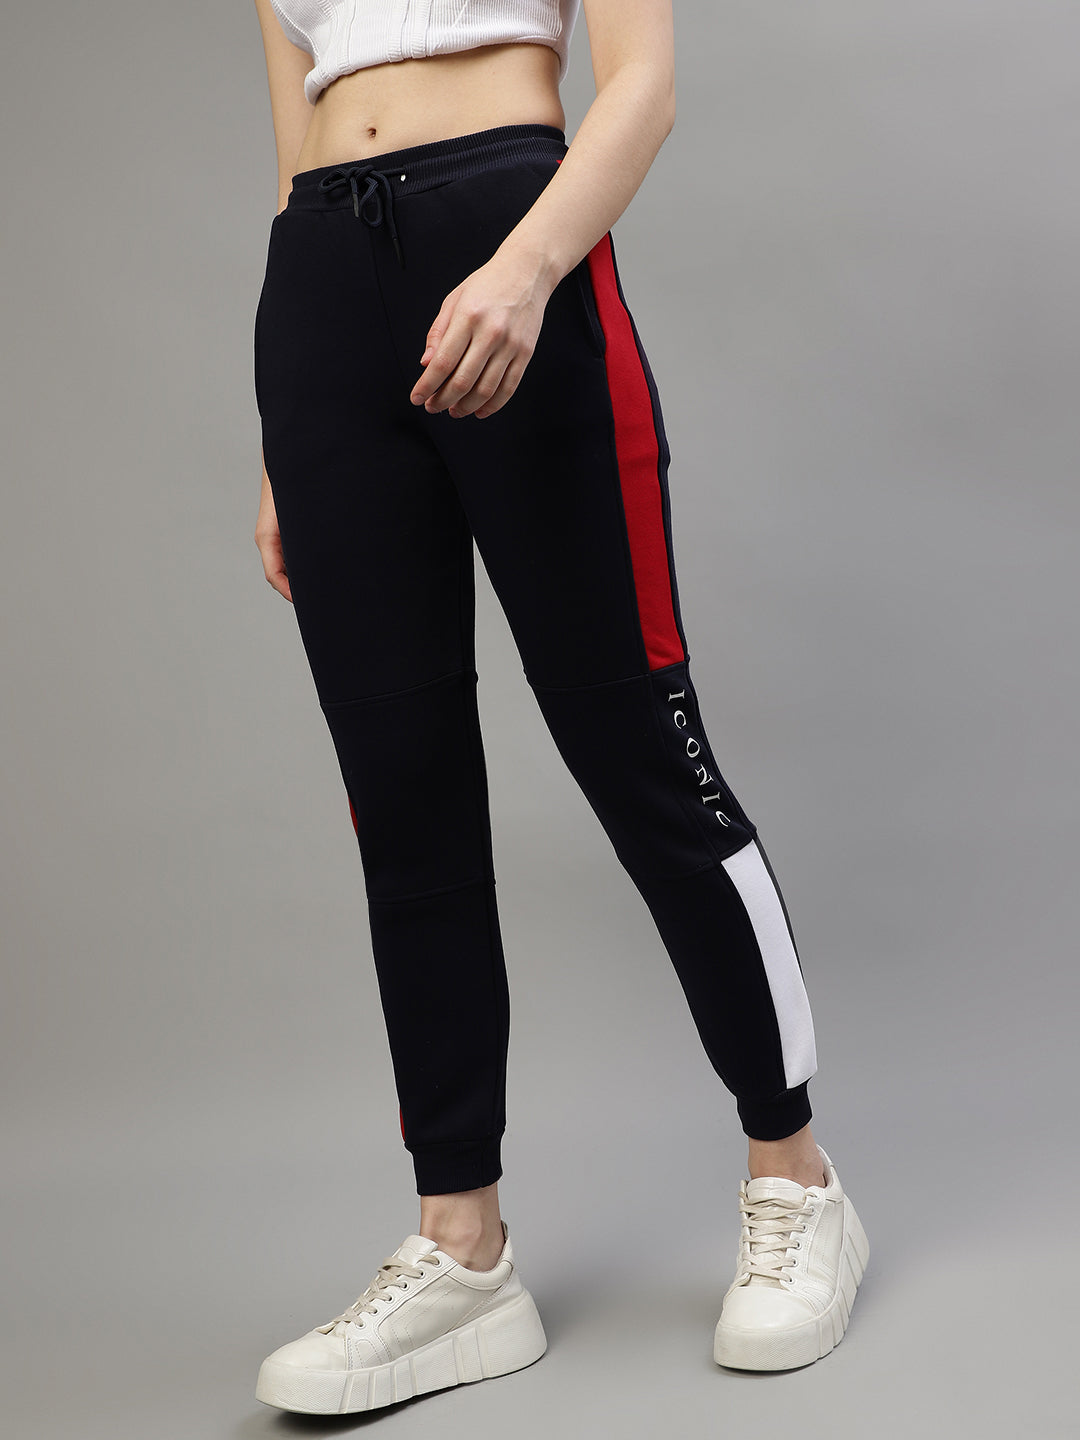 Women Tight Track Pants - Buy Women Tight Track Pants online in India